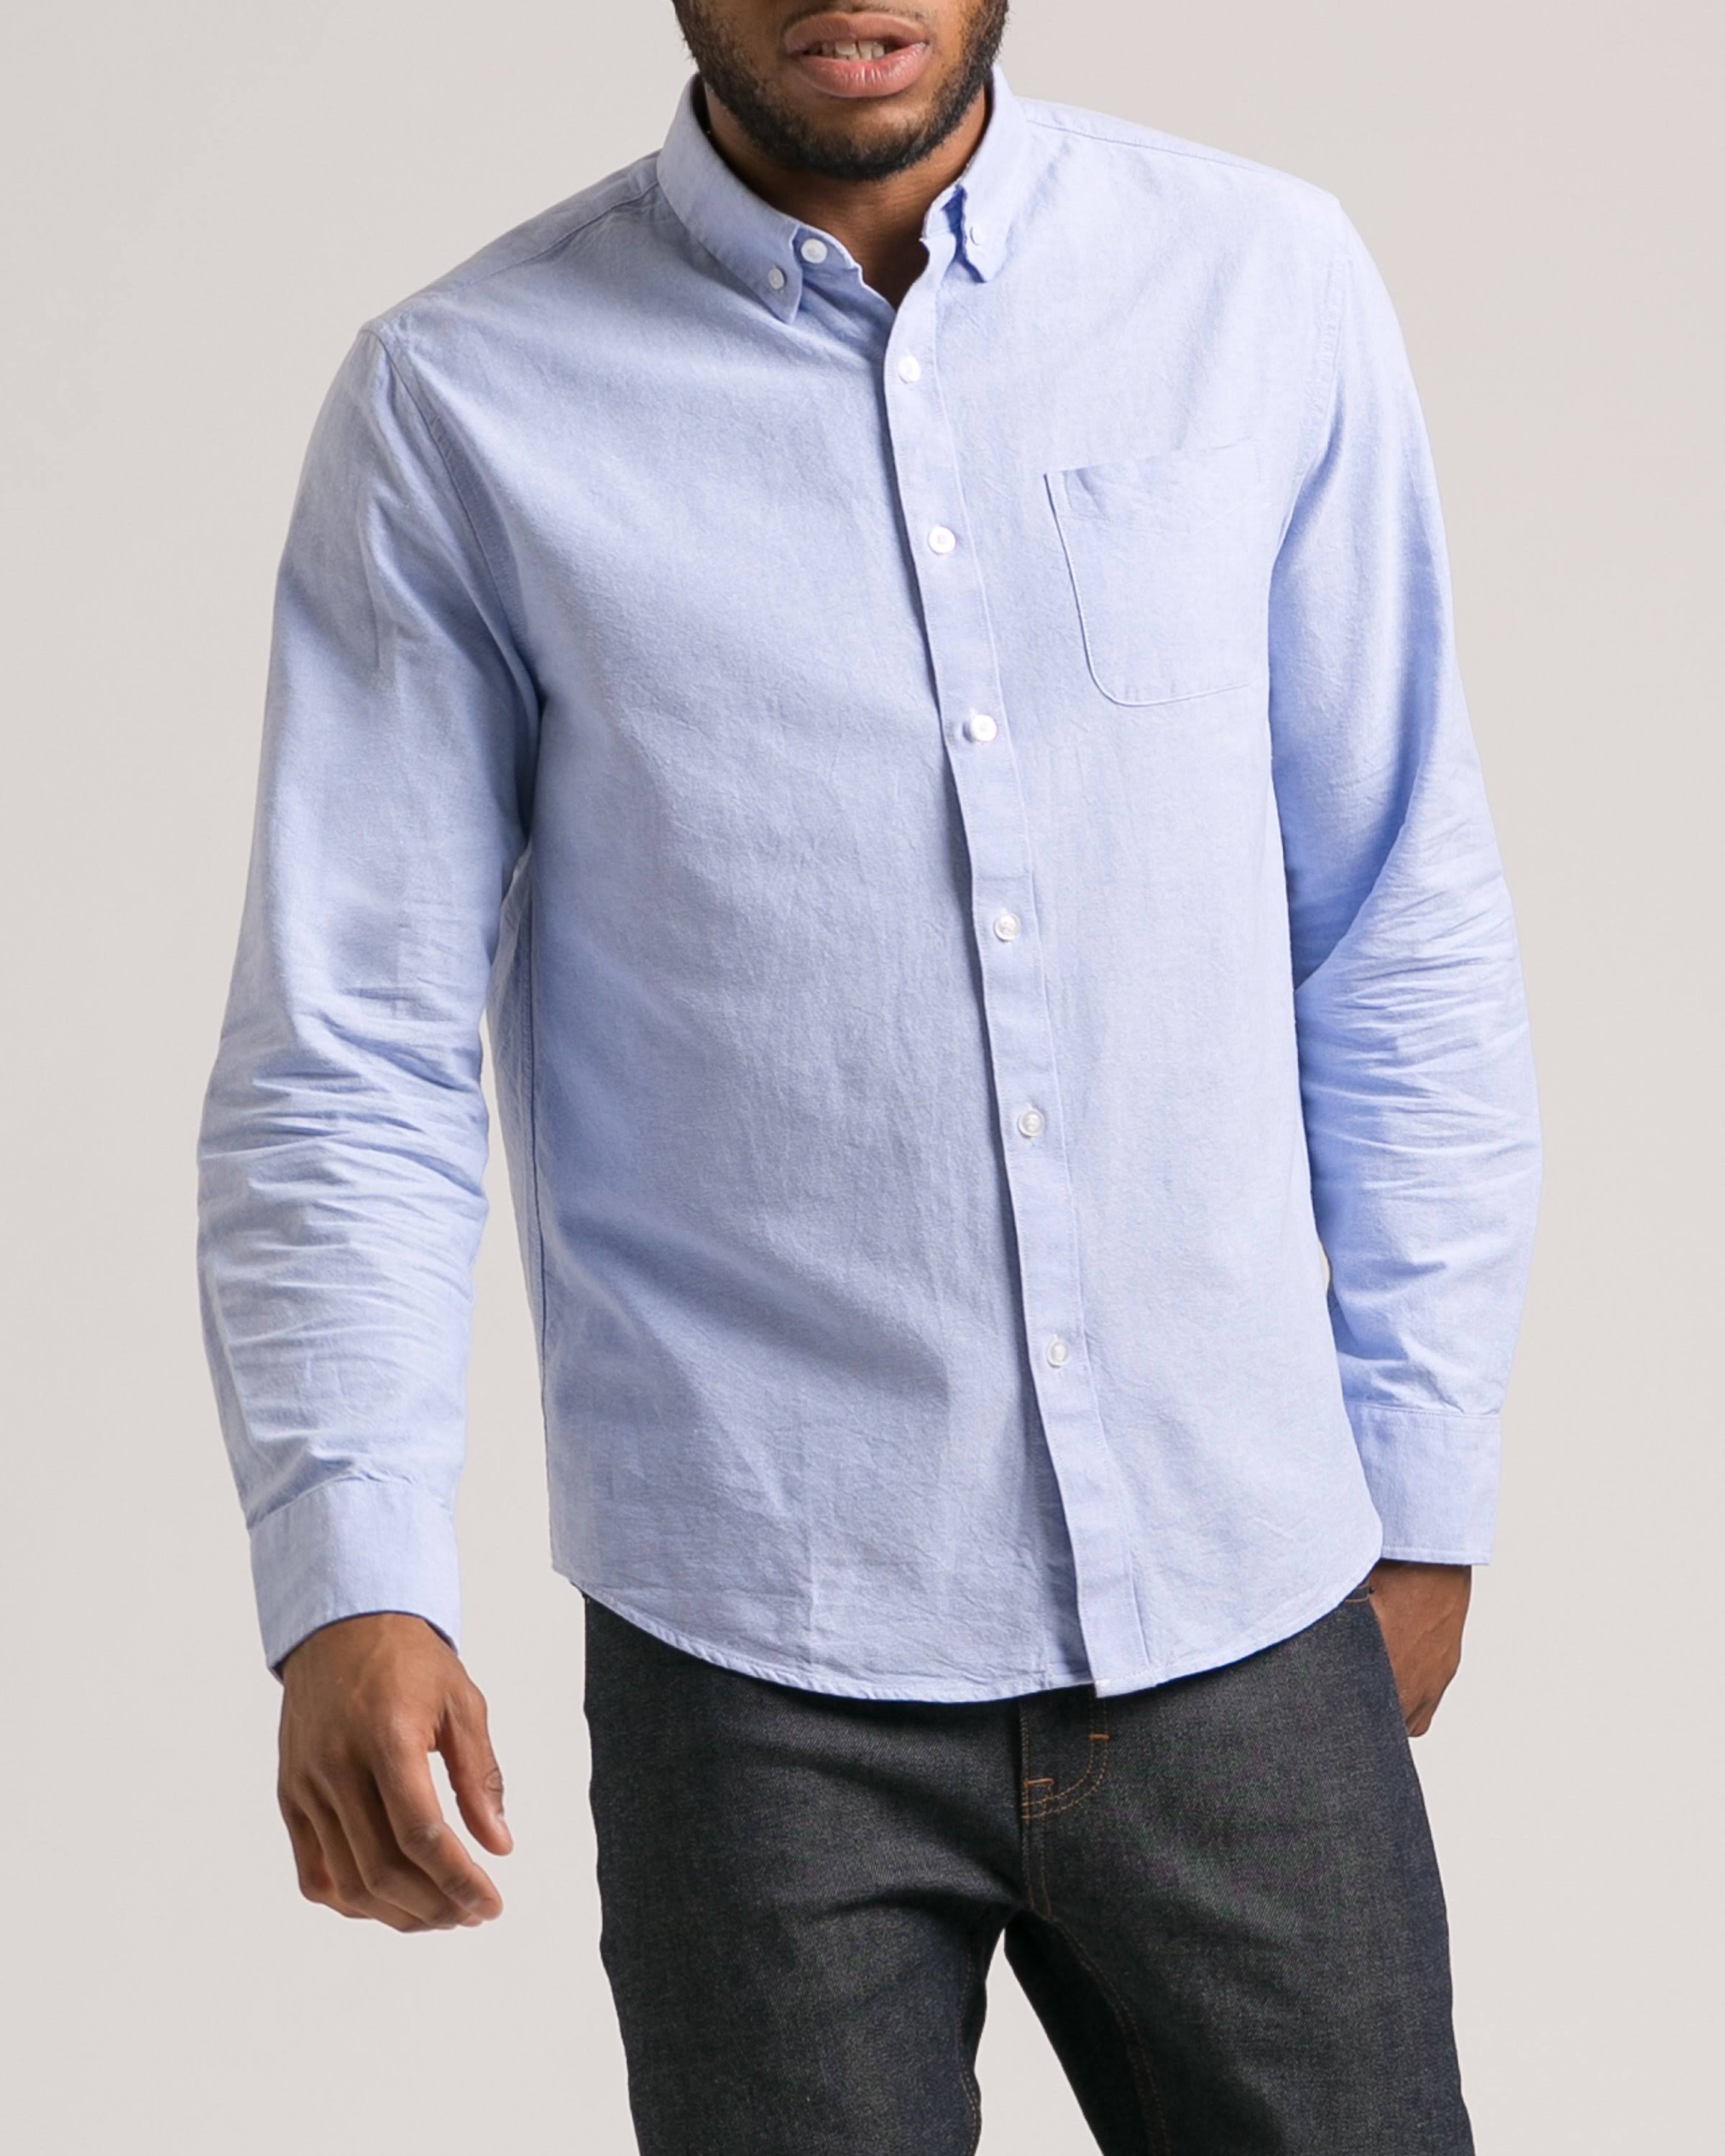 Men's JackThreads Classic Oxford Shirt in Blue (Size Small) (Available in More Sizes)